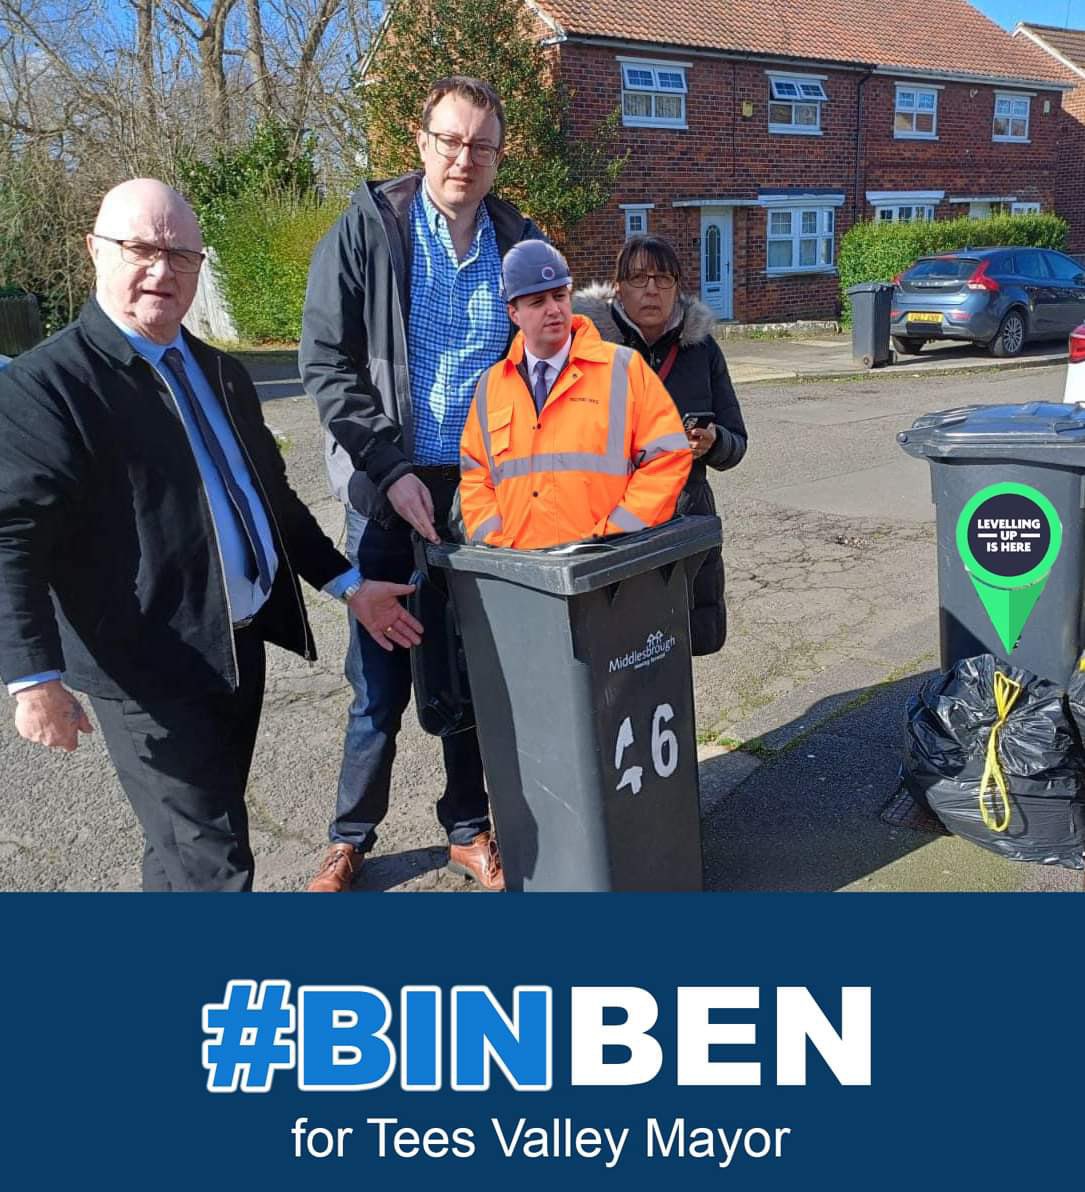 Last push to #BinBen and #TrashTurner!

If you haven't voted yet, why not?

Polling stations shut at 10pm so there's still time. Let's do this!

#TeessideResistance
#ToriesOut 
#LocalElections